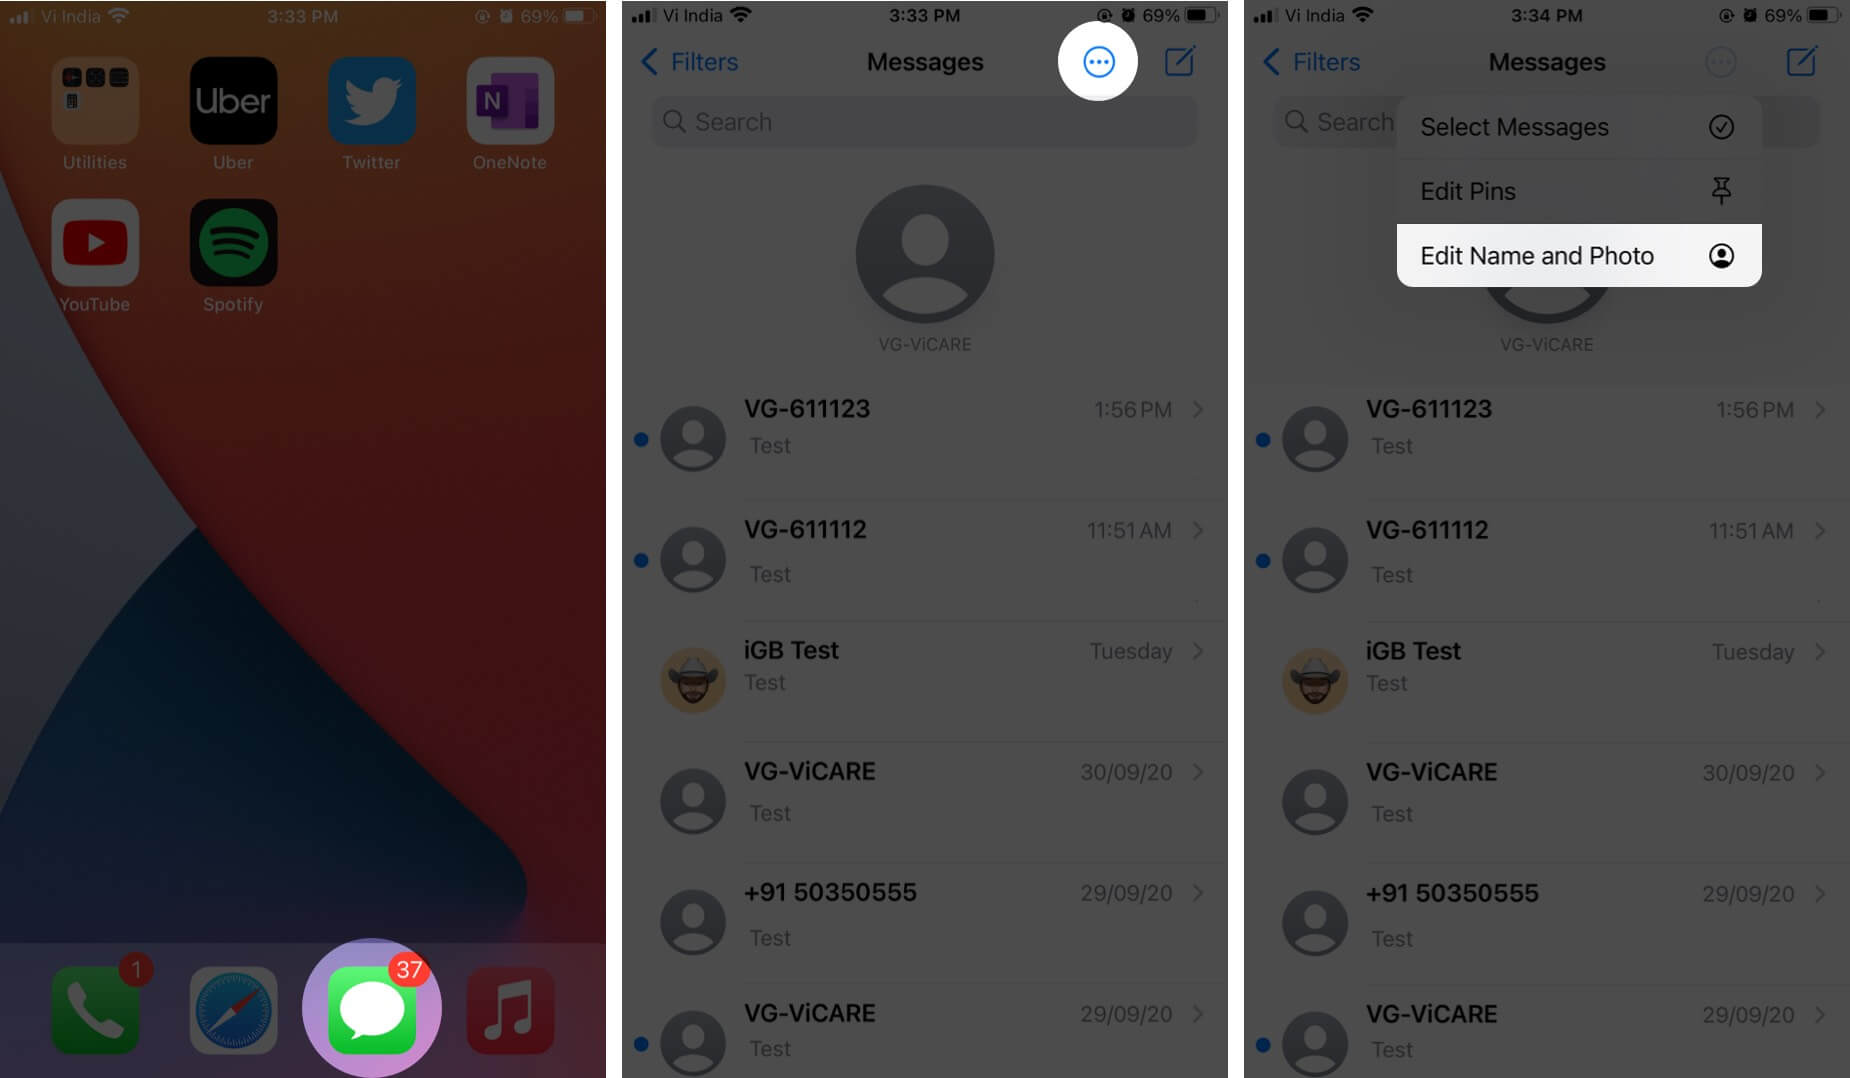 Open iMessage App Tap on Three Dots and Then Tap on Edit Name and Photo on iPhone